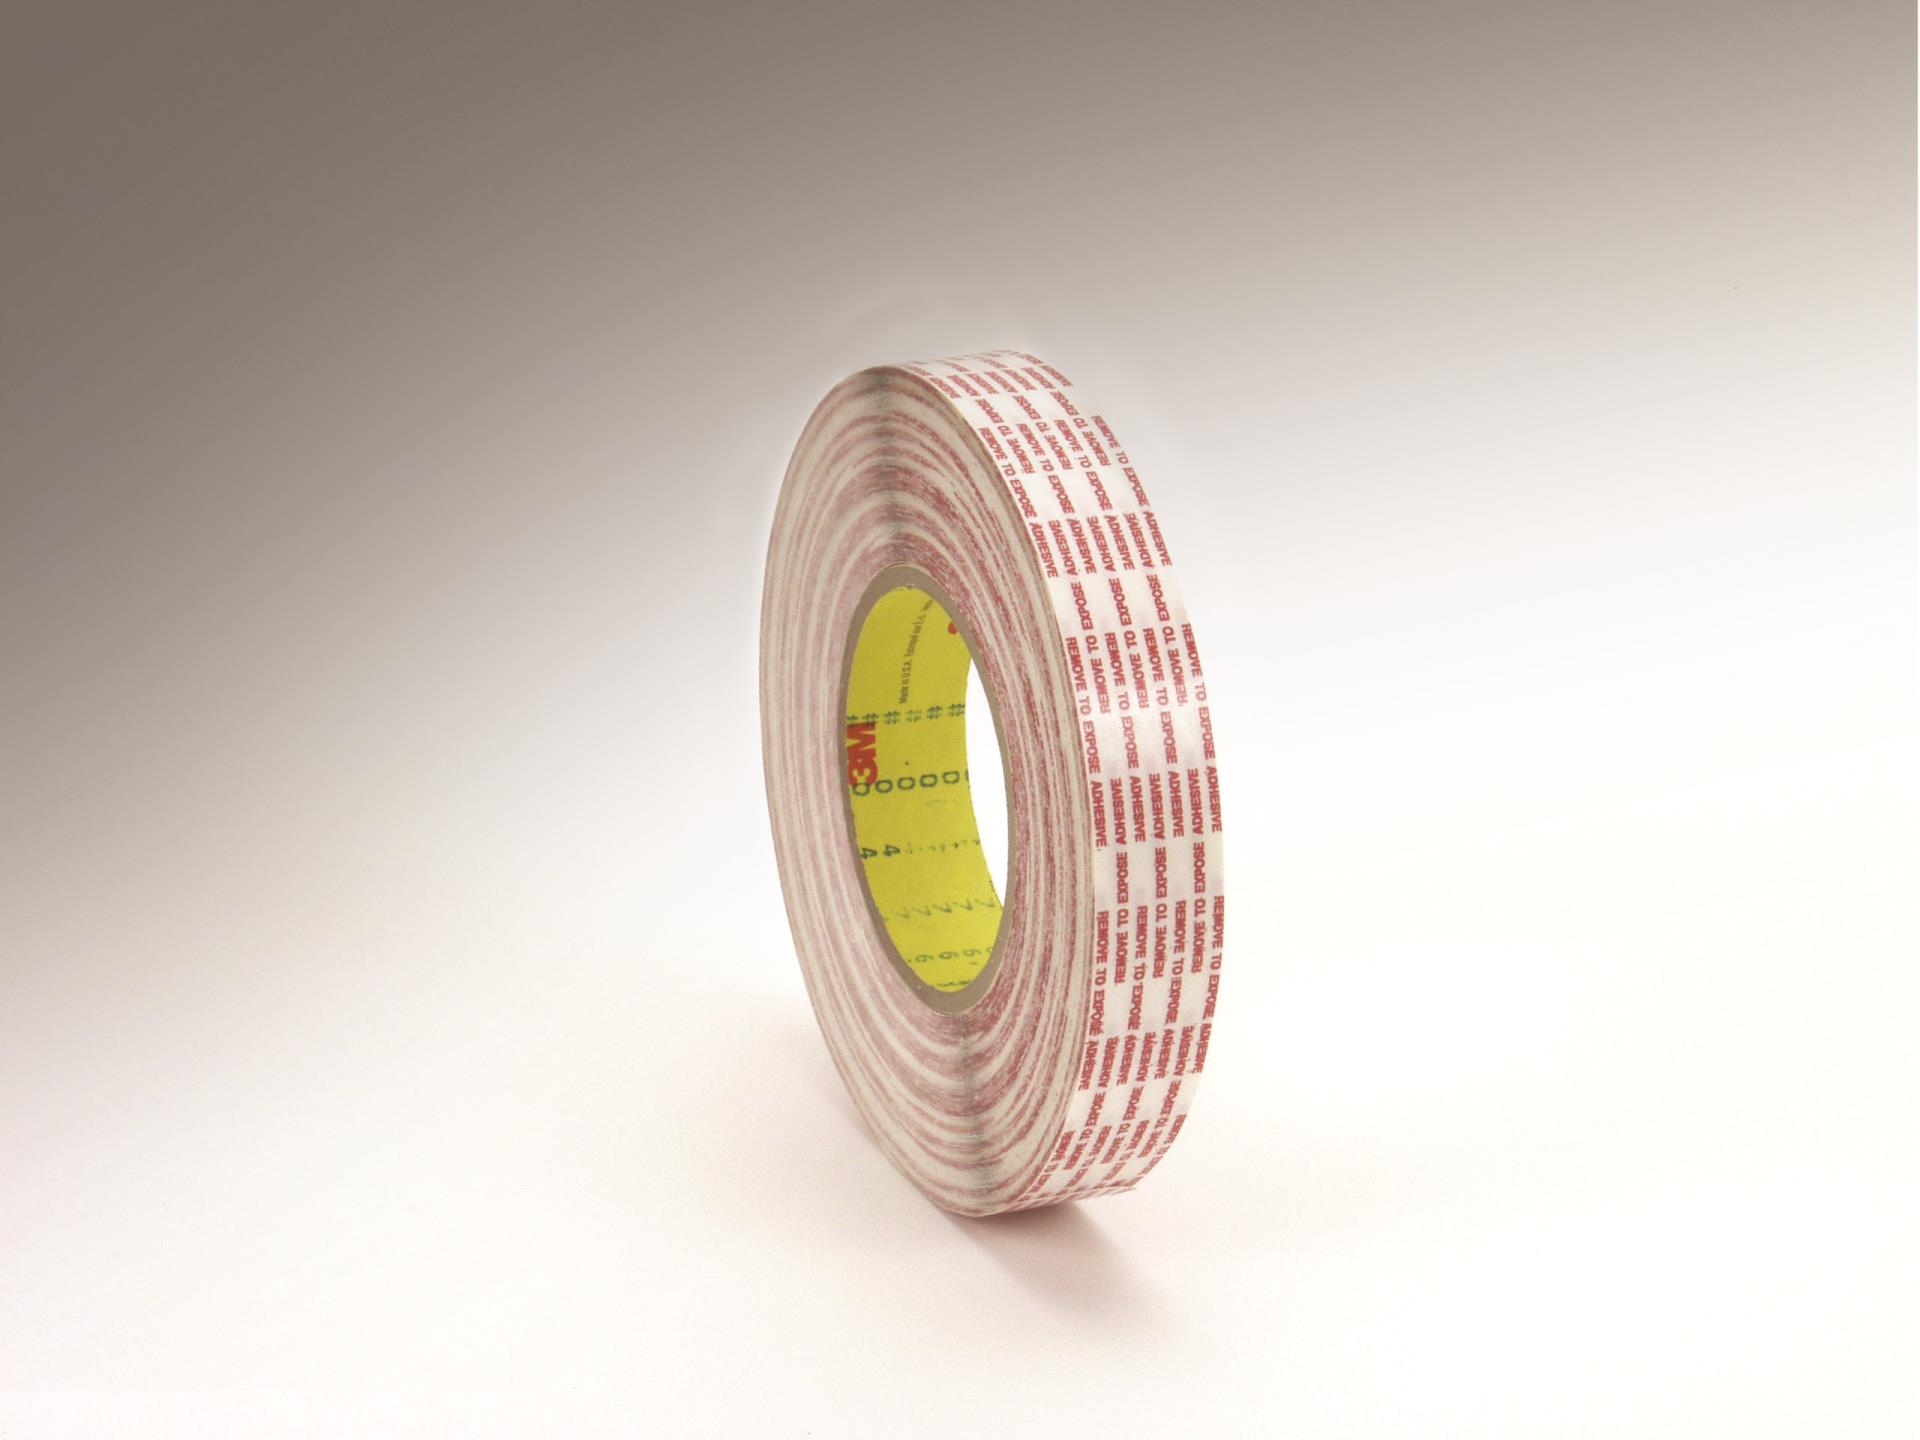 https://www.e-aircraftsupply.com/ItemImages/01/7010374001_3M_Double_Coated_Tape_Extended_Liner_476XL_Translucent.jpg